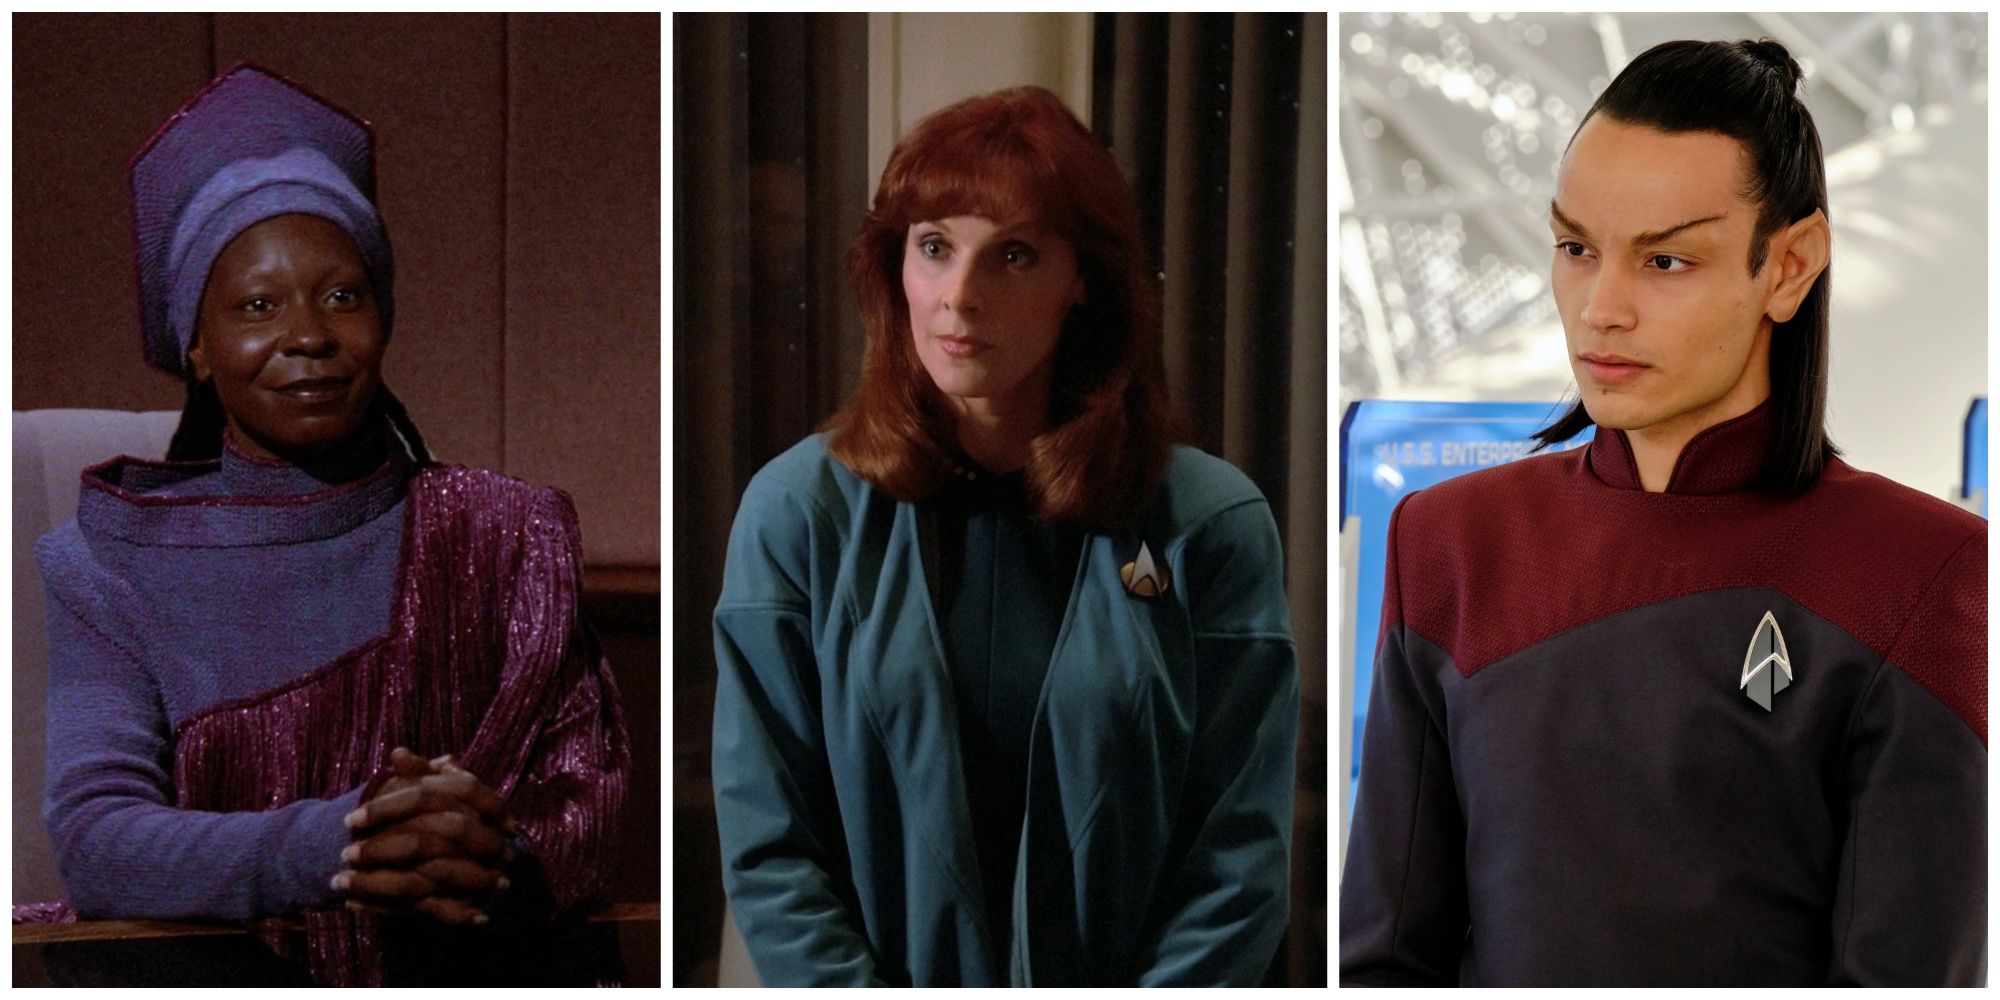 Split image showing Picard's friends: Guinan, Doctor Crusher, and Elnor.